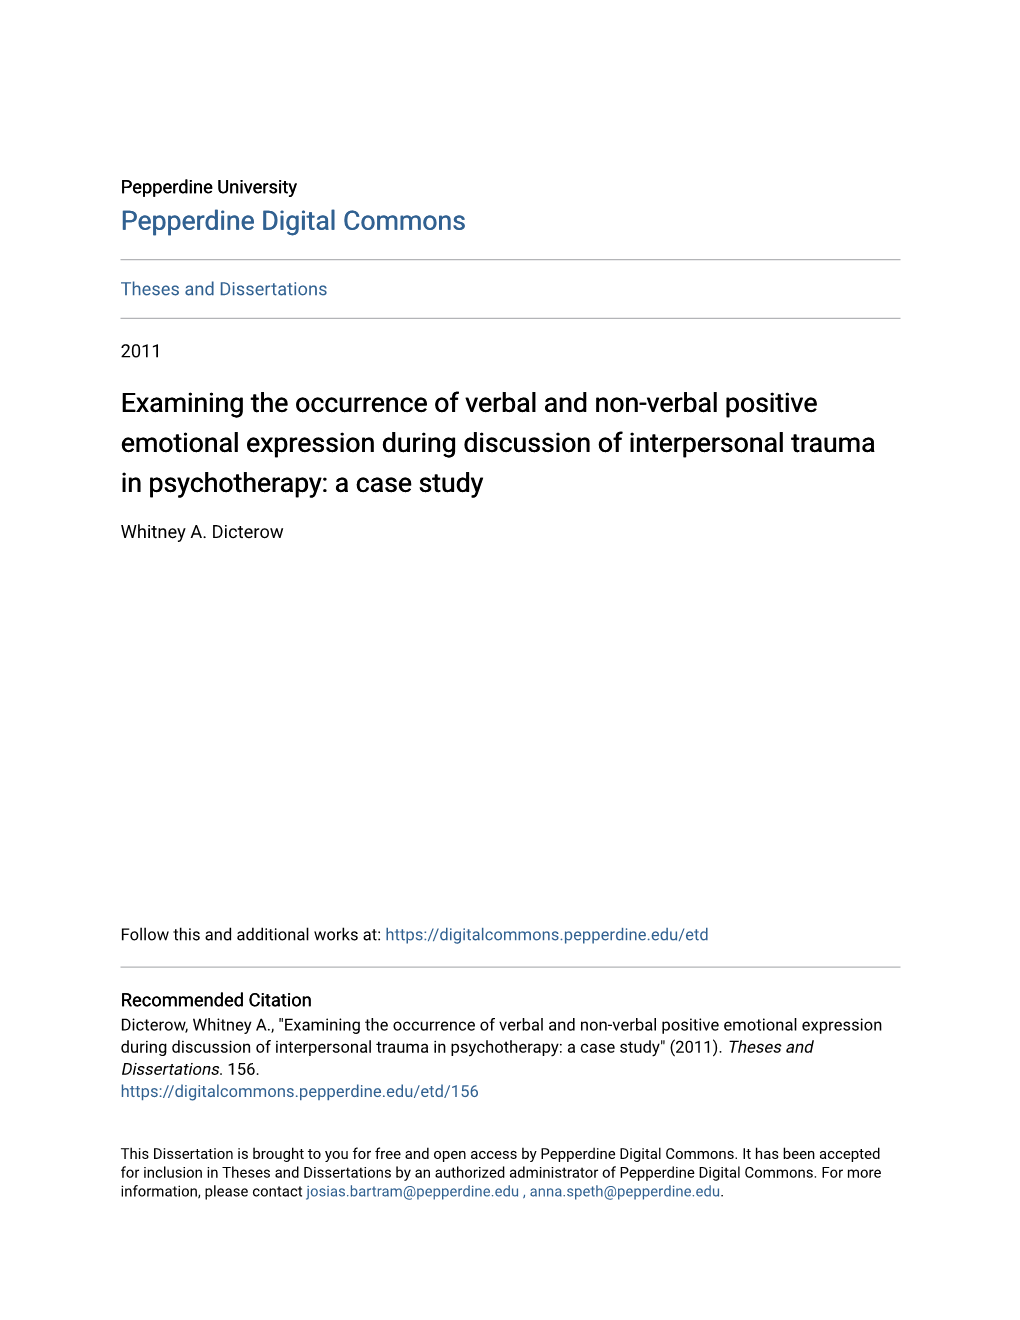 Examining the Occurrence of Verbal and Non-Verbal Positive Emotional Expression During Discussion of Interpersonal Trauma in Psychotherapy: a Case Study